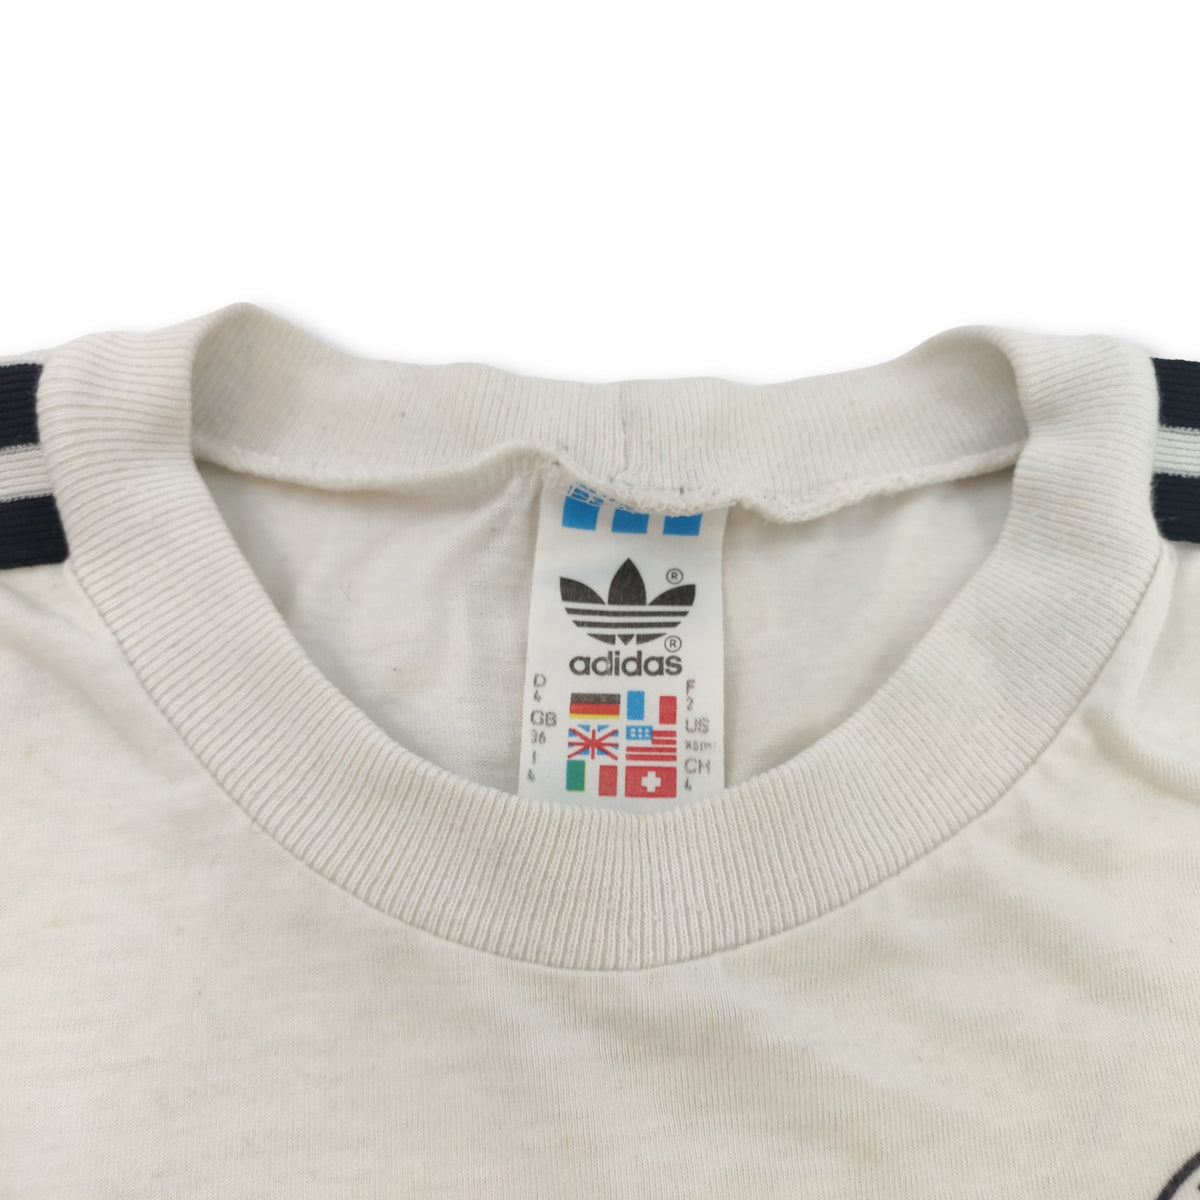 1990-92 white West Germany Adidas cotton football shirt | retroiscooler ...